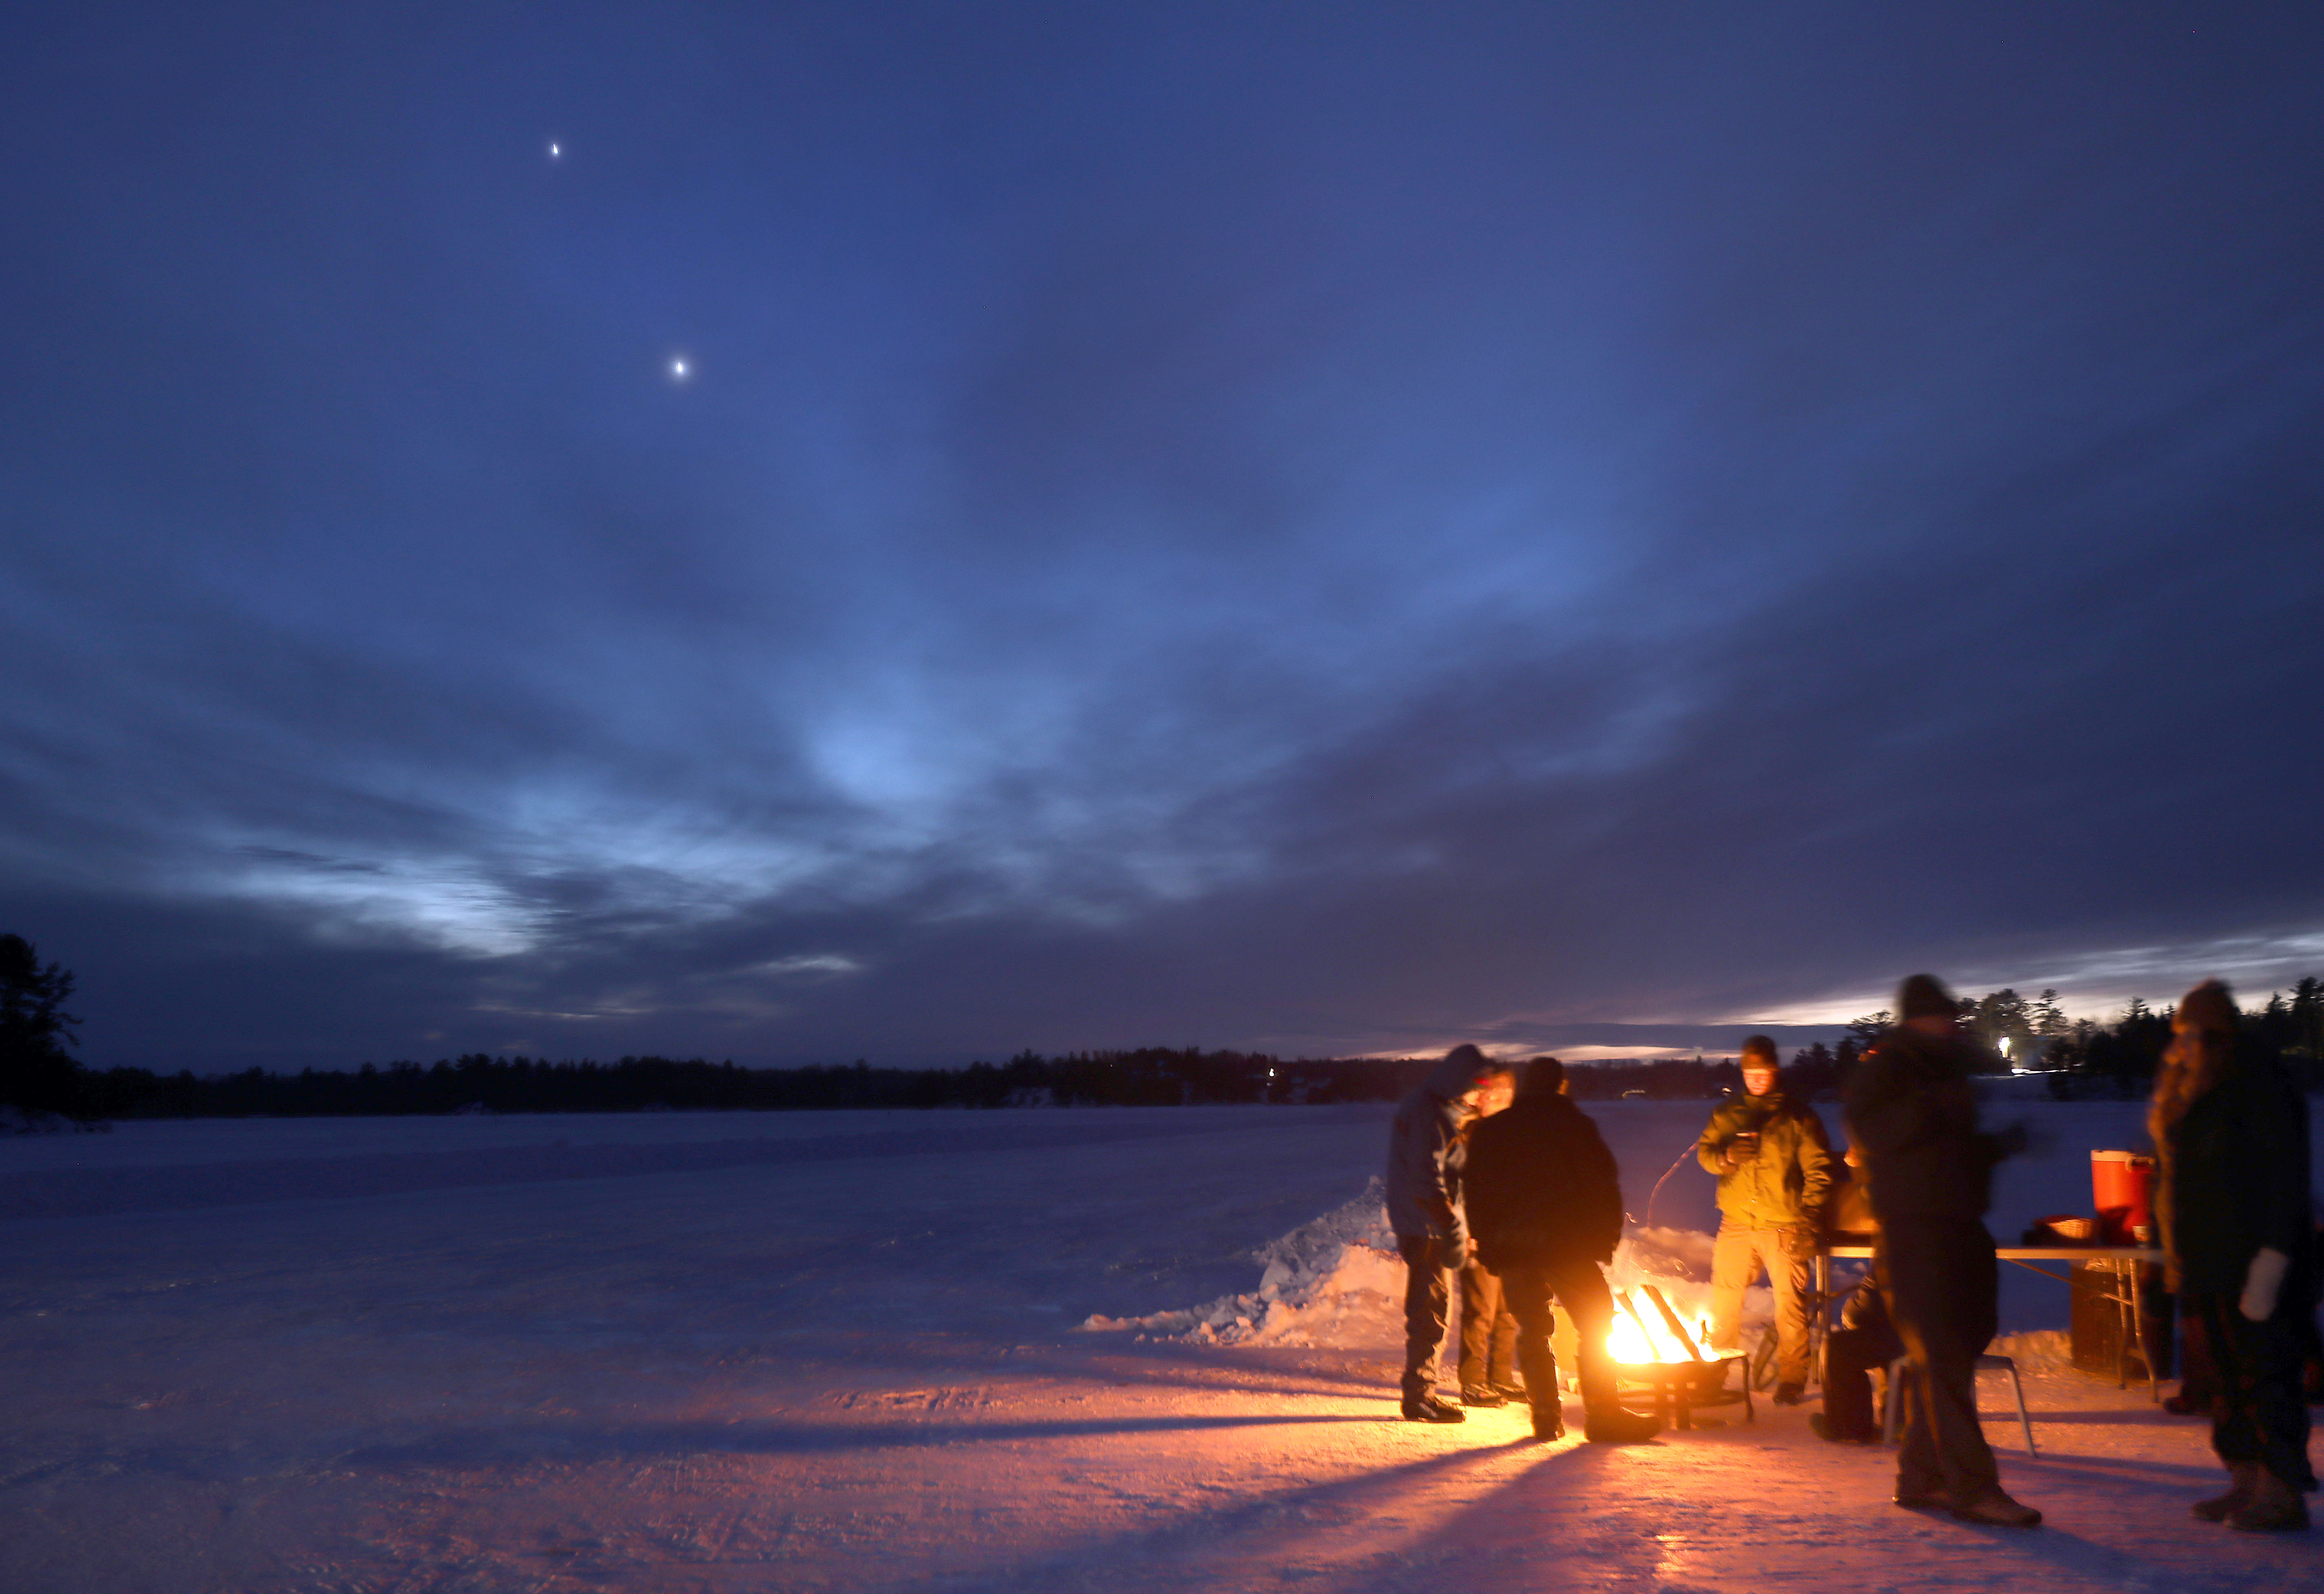 5 people gathered around a small fire on a frozen lake.  The sky is dark, but two bright planets are visable low on the horizon.  Jupiter is just below venus.